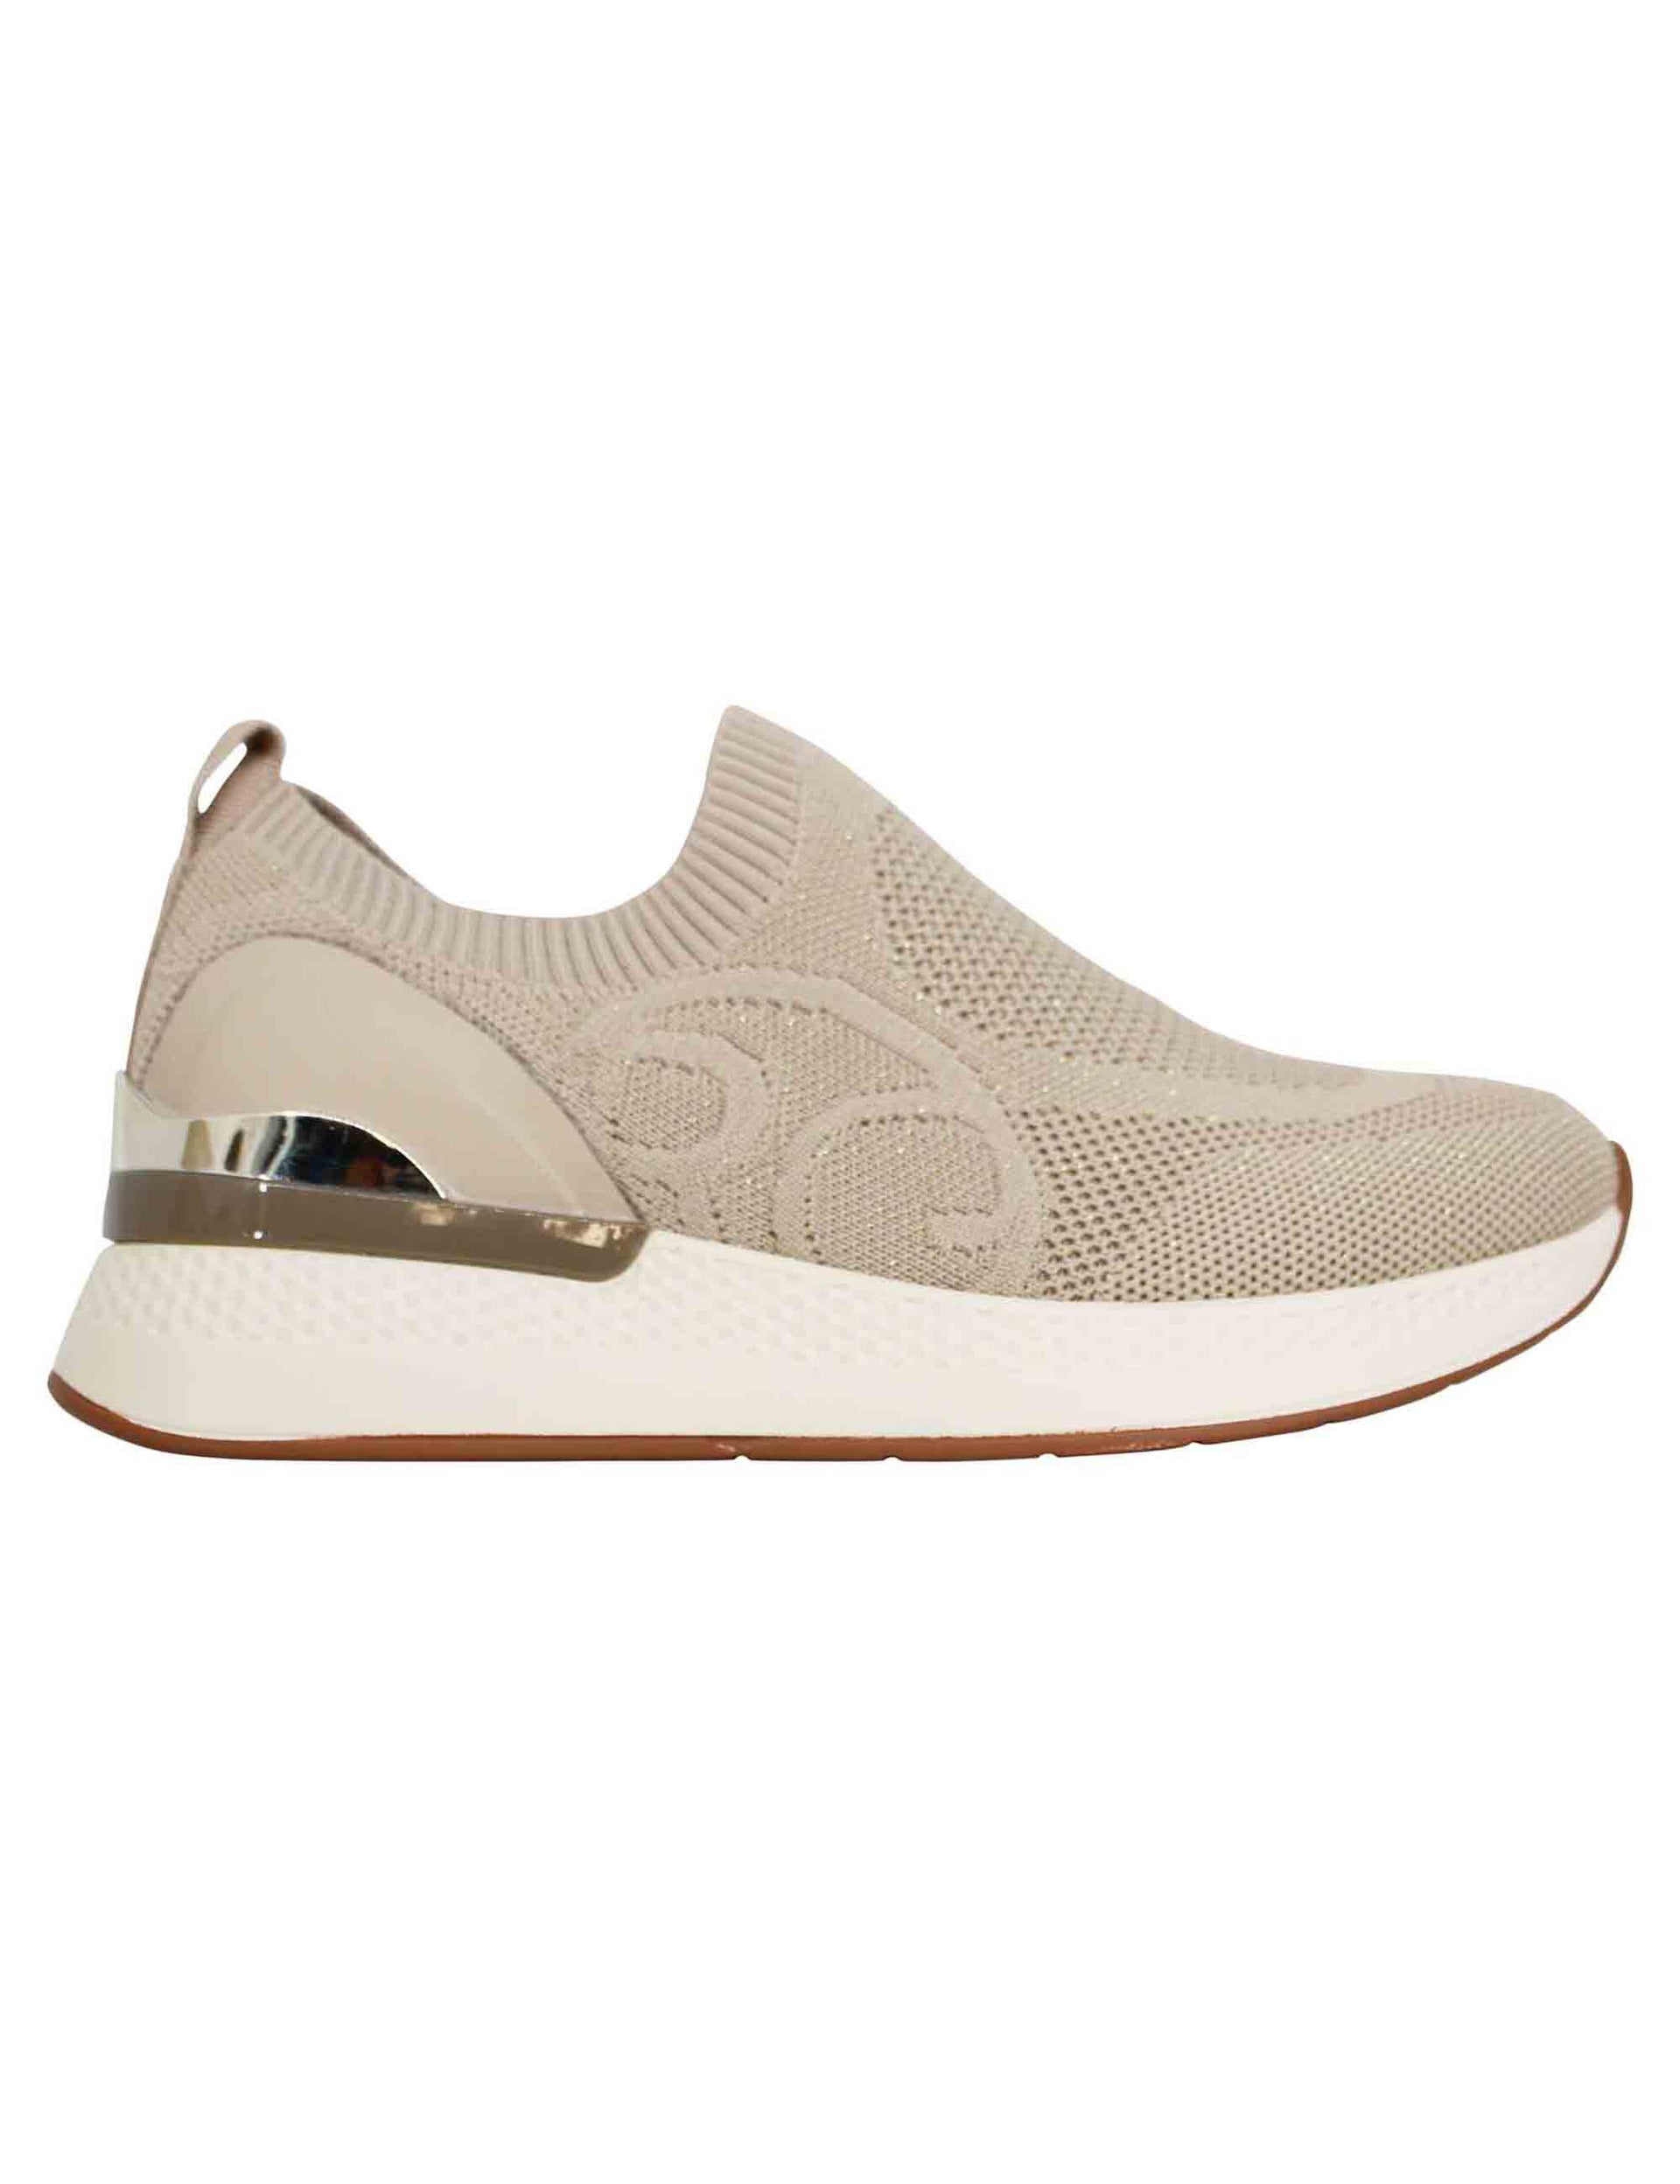 Women's sneakers in taupe stretch fabric with high rubber sole